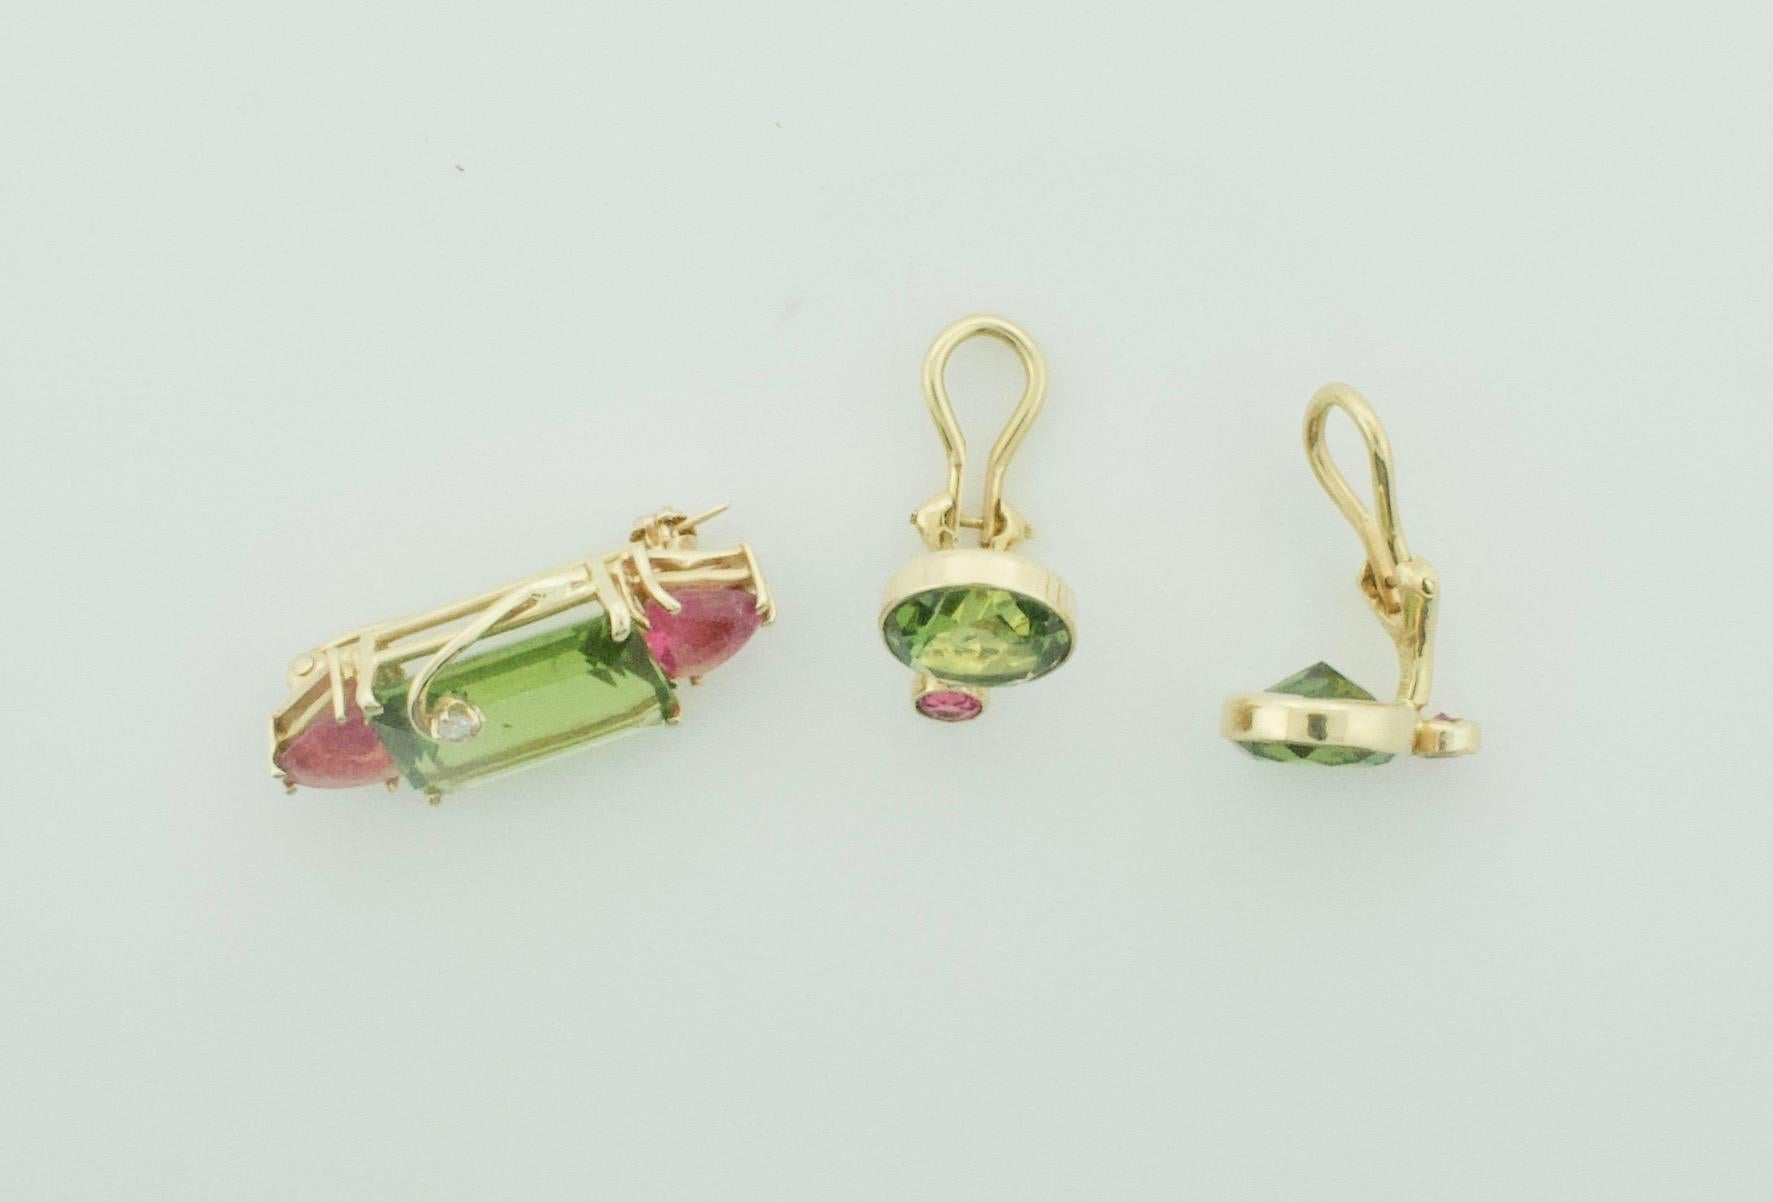 Emerald Cut Peridot and Tourmaline Brooch and Earrings Set in 18k Yellow Gold For Sale